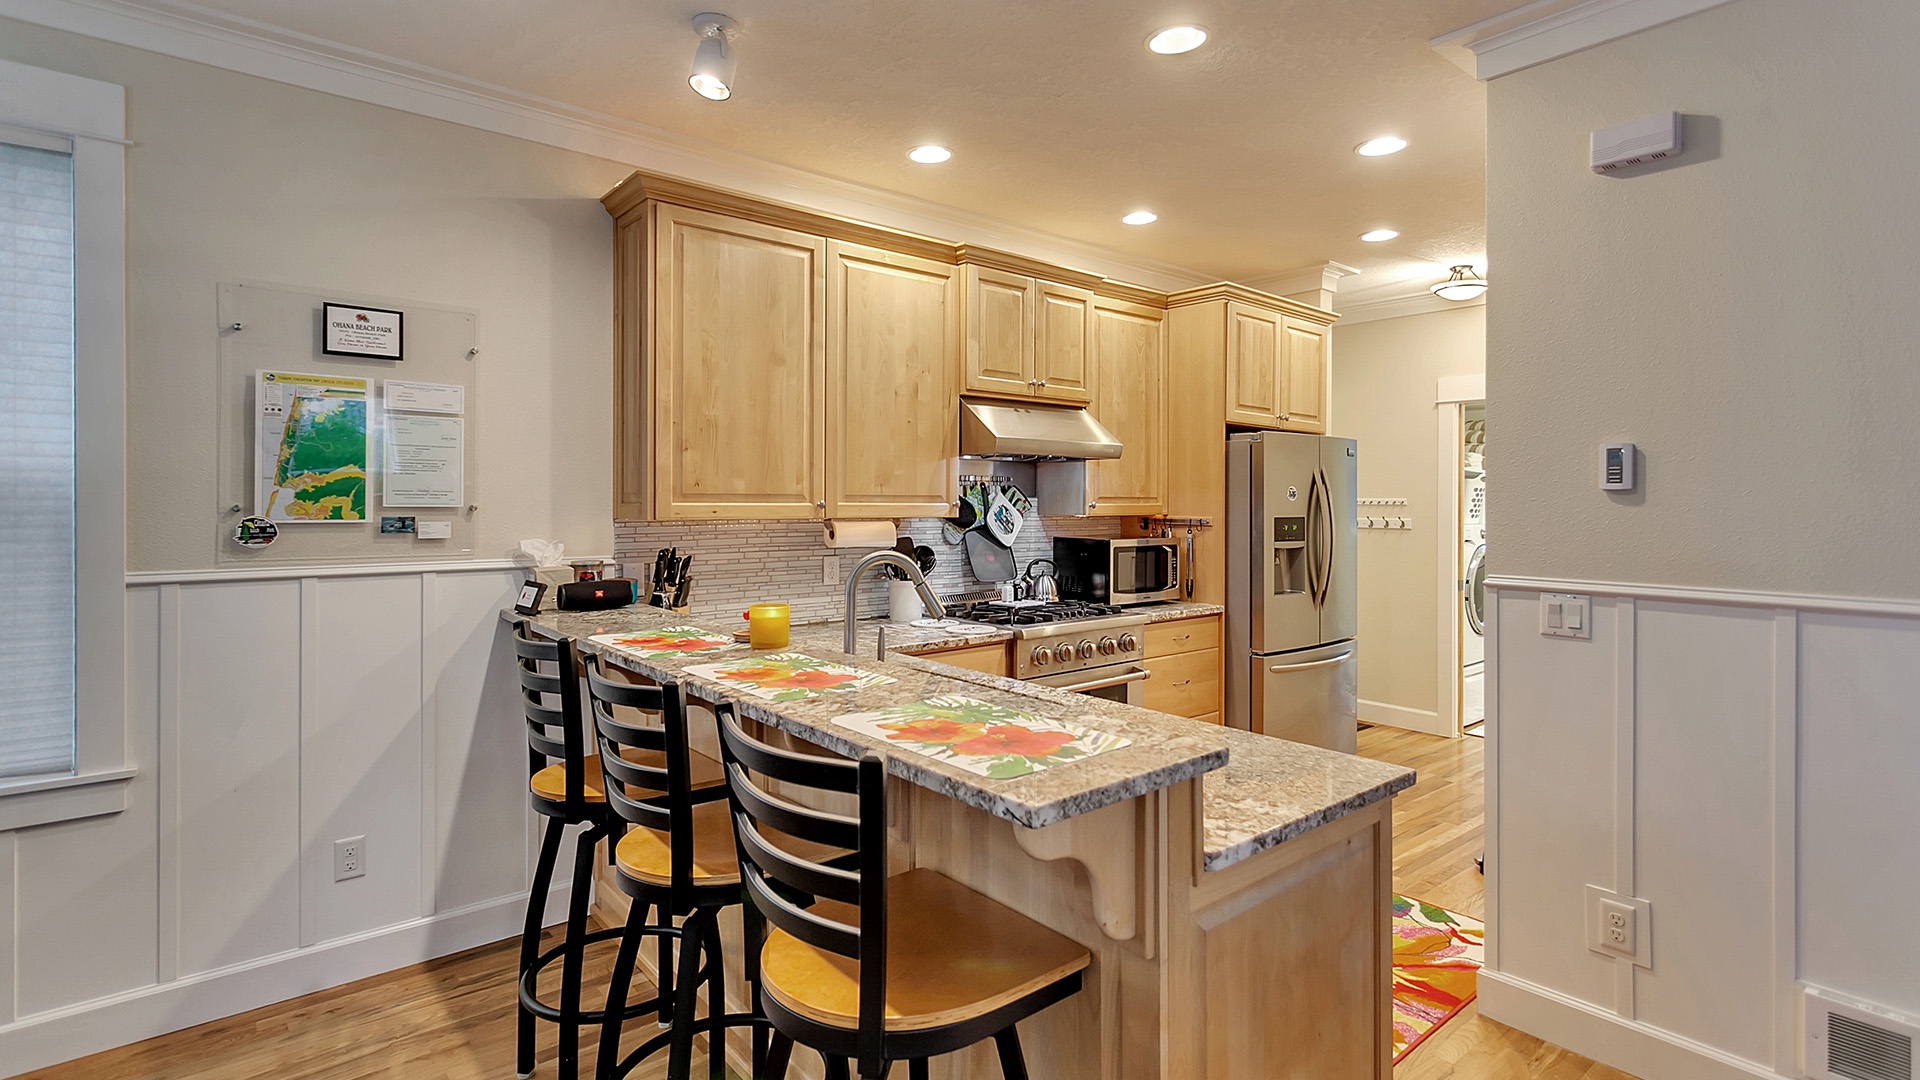 Lincoln City Vacation Rentals, Ohana Beach Park - Additional breakfast bar seating at the kitchen counter